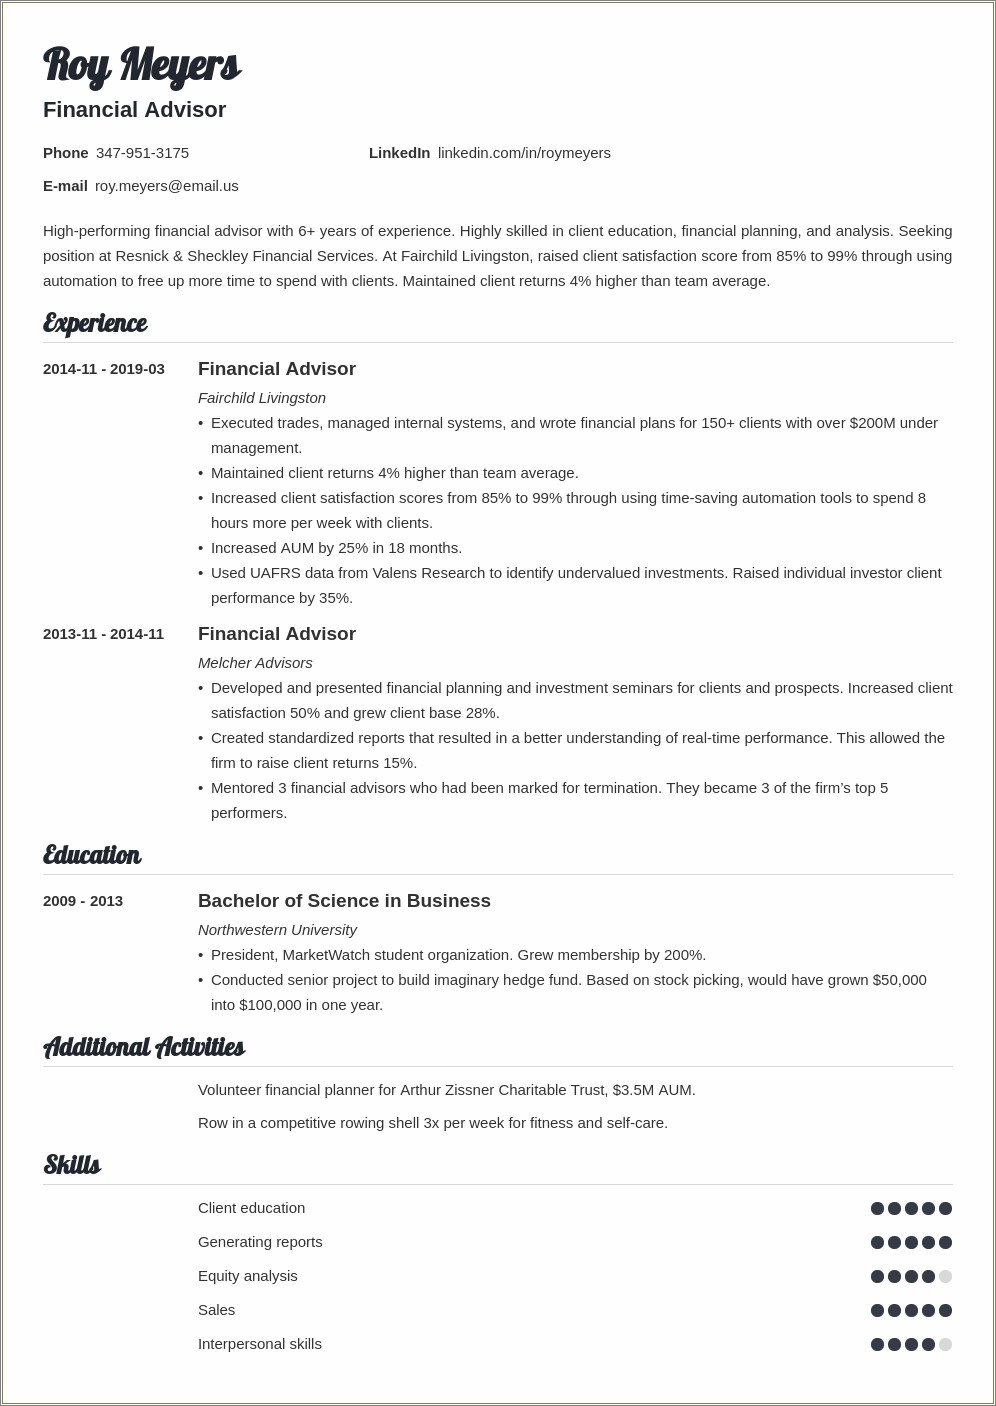 Resume Templates Financial Planning & Analysis Role